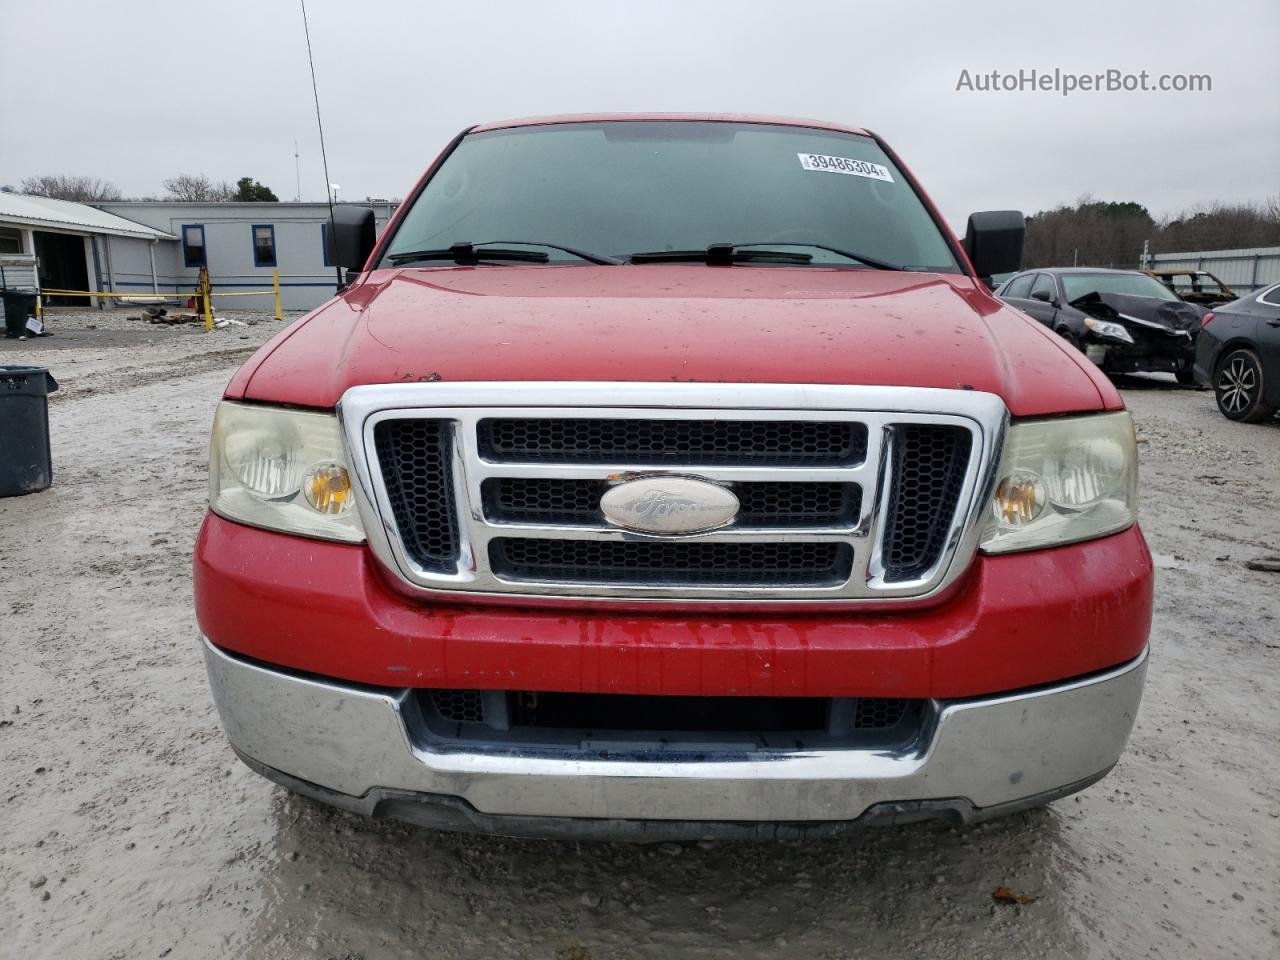 2004 Ford F150  Red vin: 1FTVF12574NA39762